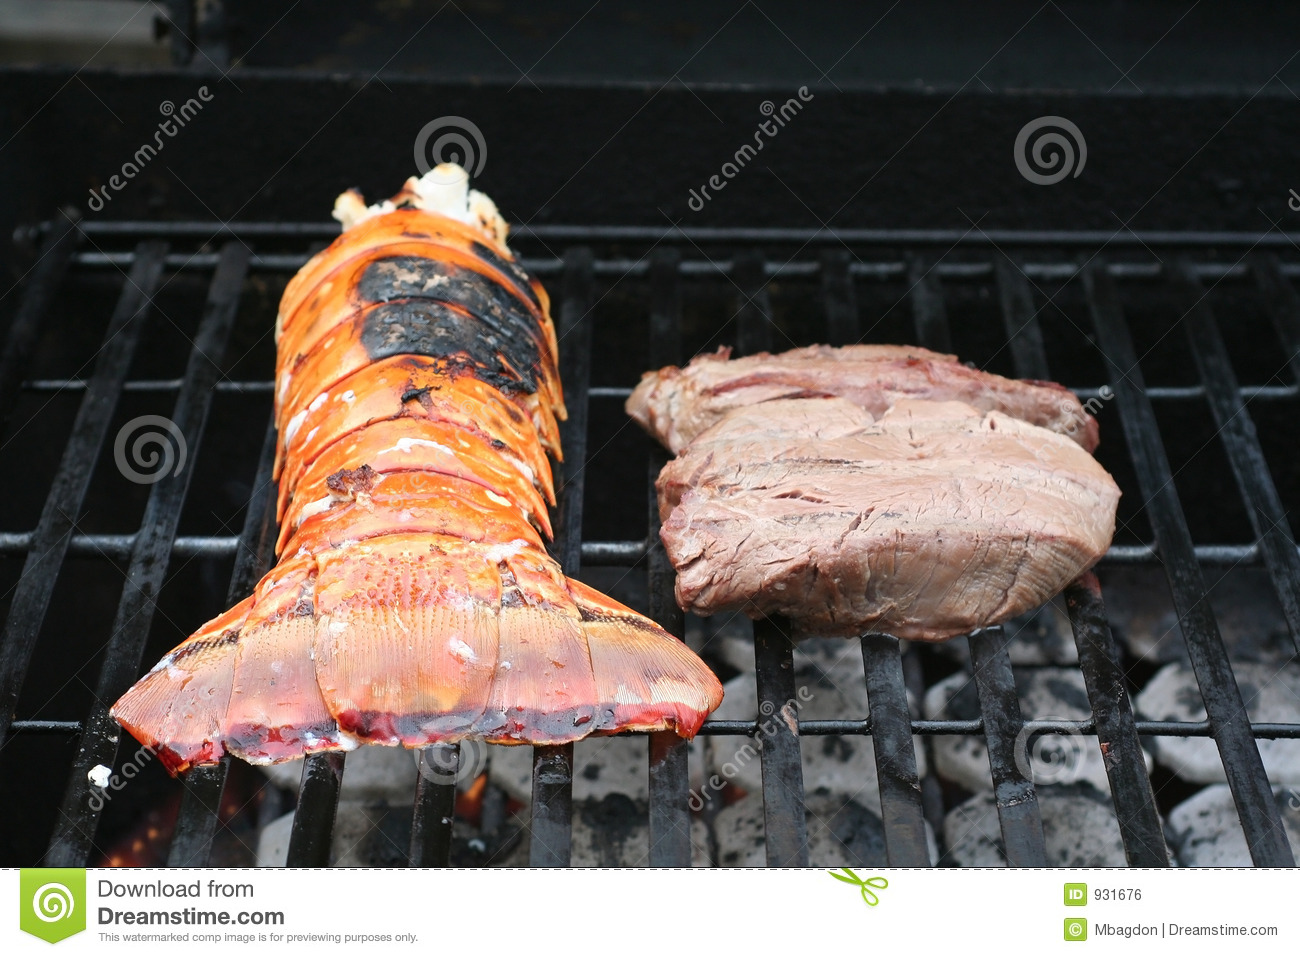 Lobster Tail And Steak Royalty Free Stock Image   Image  931676